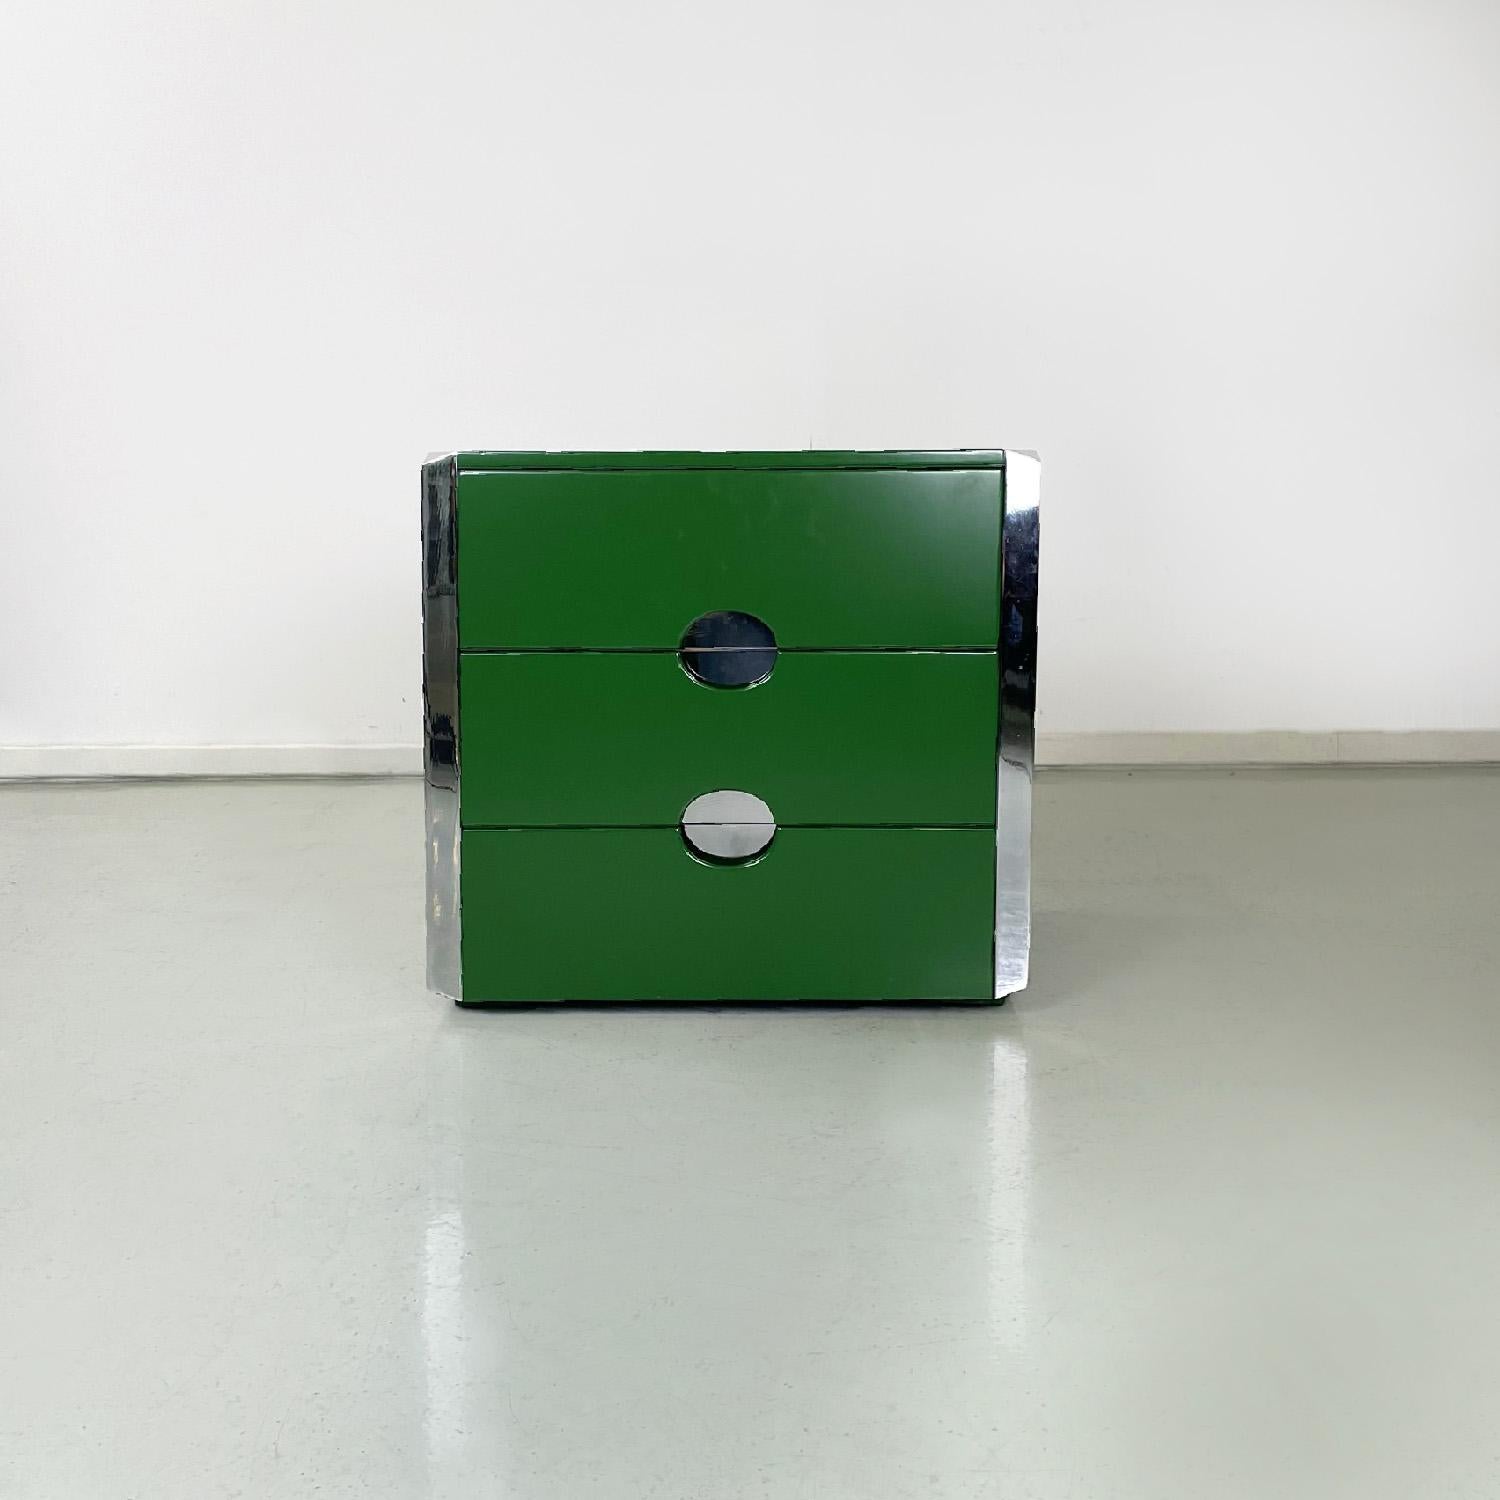 Italian modern MB3 bedside tables by Luigi Caccia Dominioni for Azucena, 1970s
Bedside tables mod. MB3 rectangular. The structure is in green lacquered wood with a matte finish, on the sides there is a chromed metal bar of the same height. They have